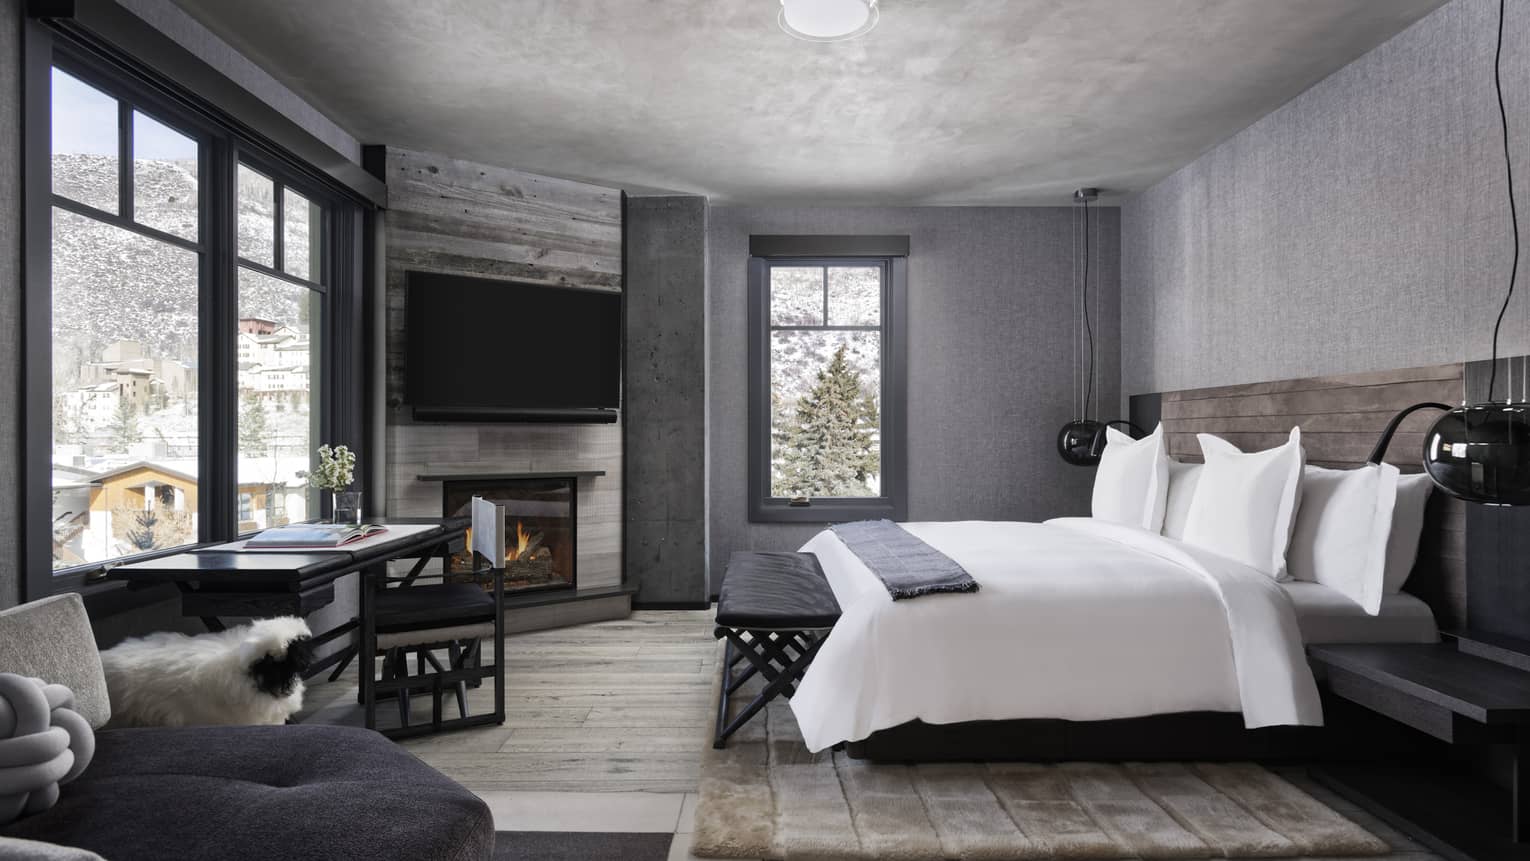 Mountain chic bedroom with white king bed, wall-mounted TV above fireplace